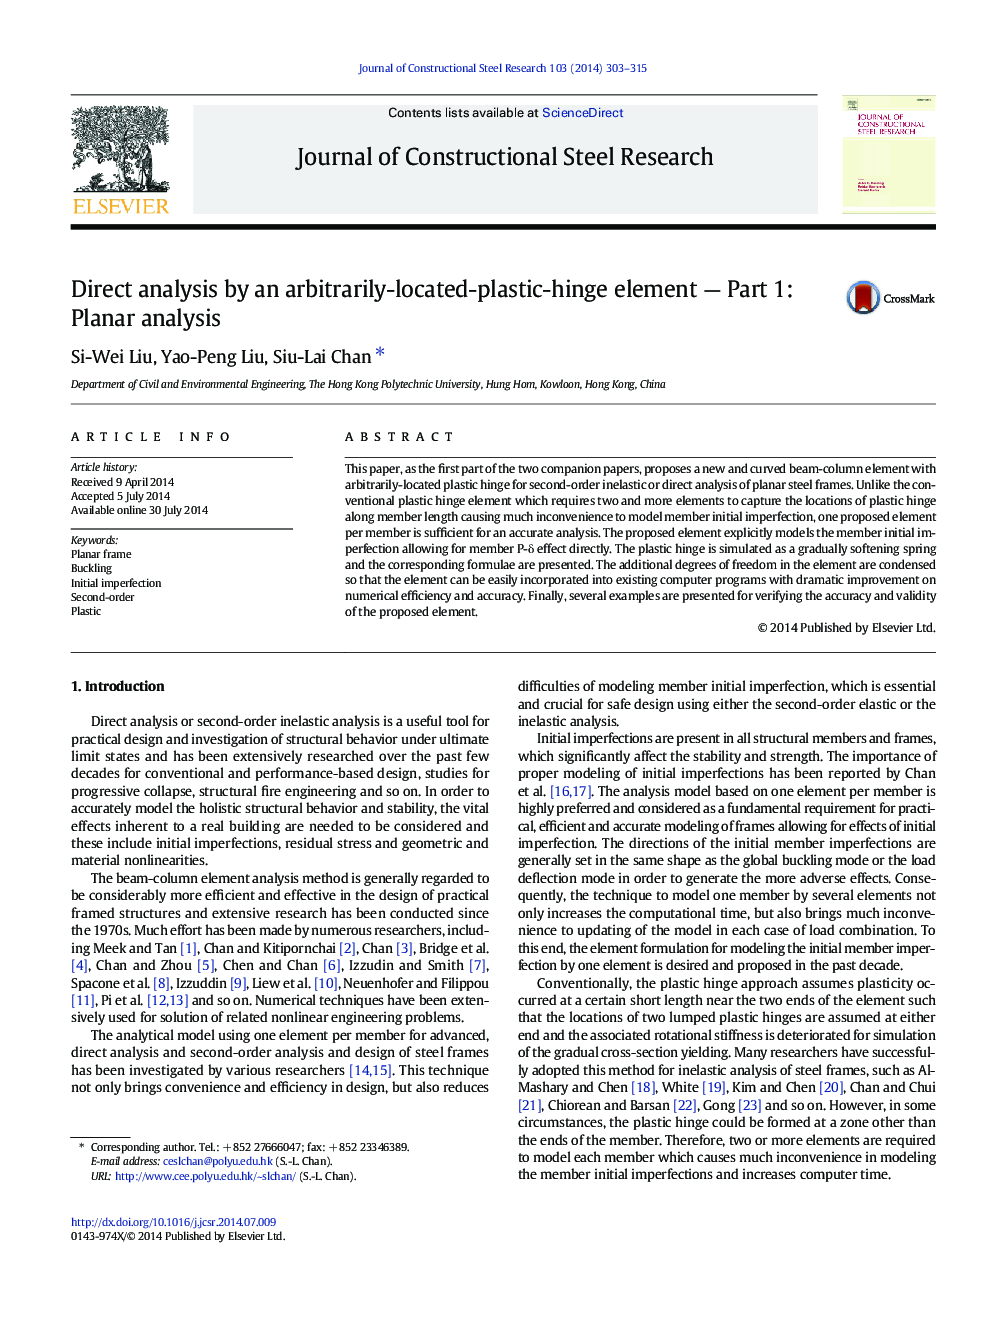 Direct analysis by an arbitrarily-located-plastic-hinge element — Part 1: Planar analysis